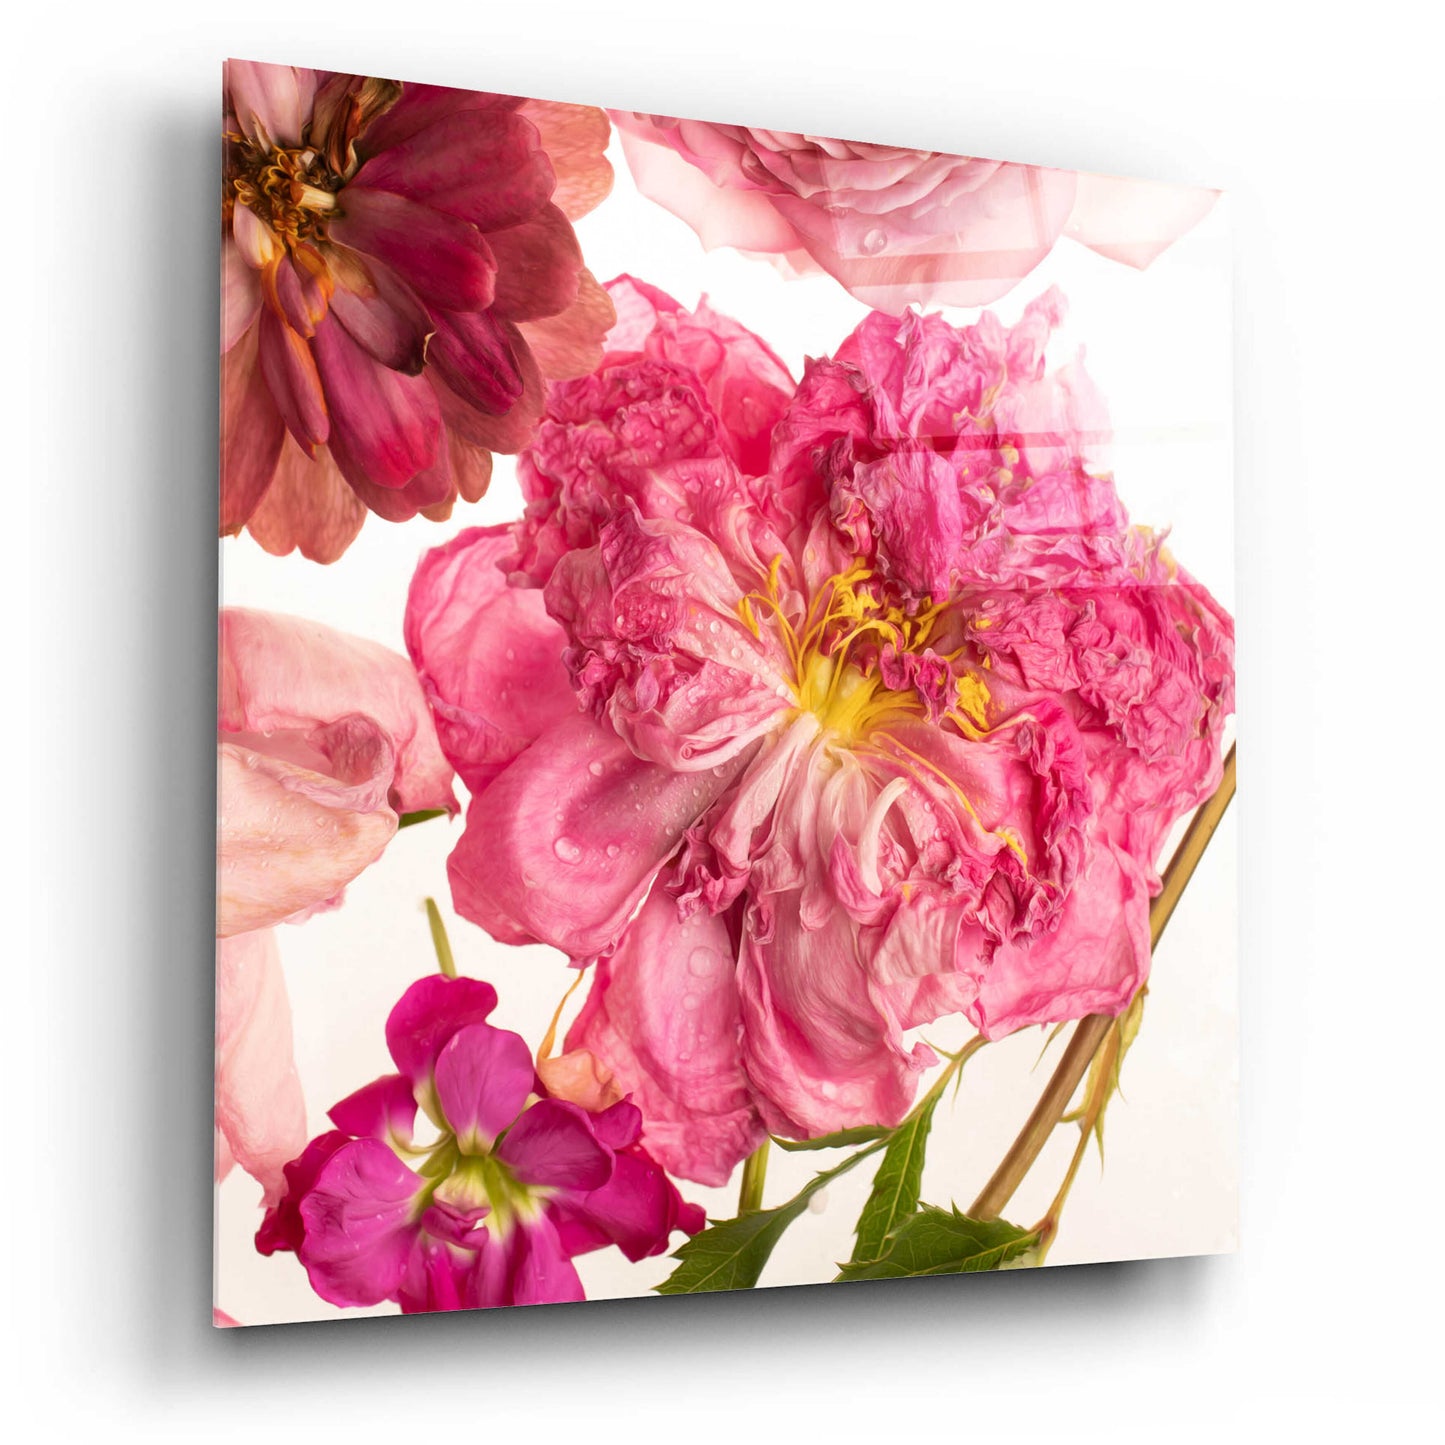 Epic Art 'Peony Dream on White' by Leah McLean, Acrylic Glass Wall Art,12x12